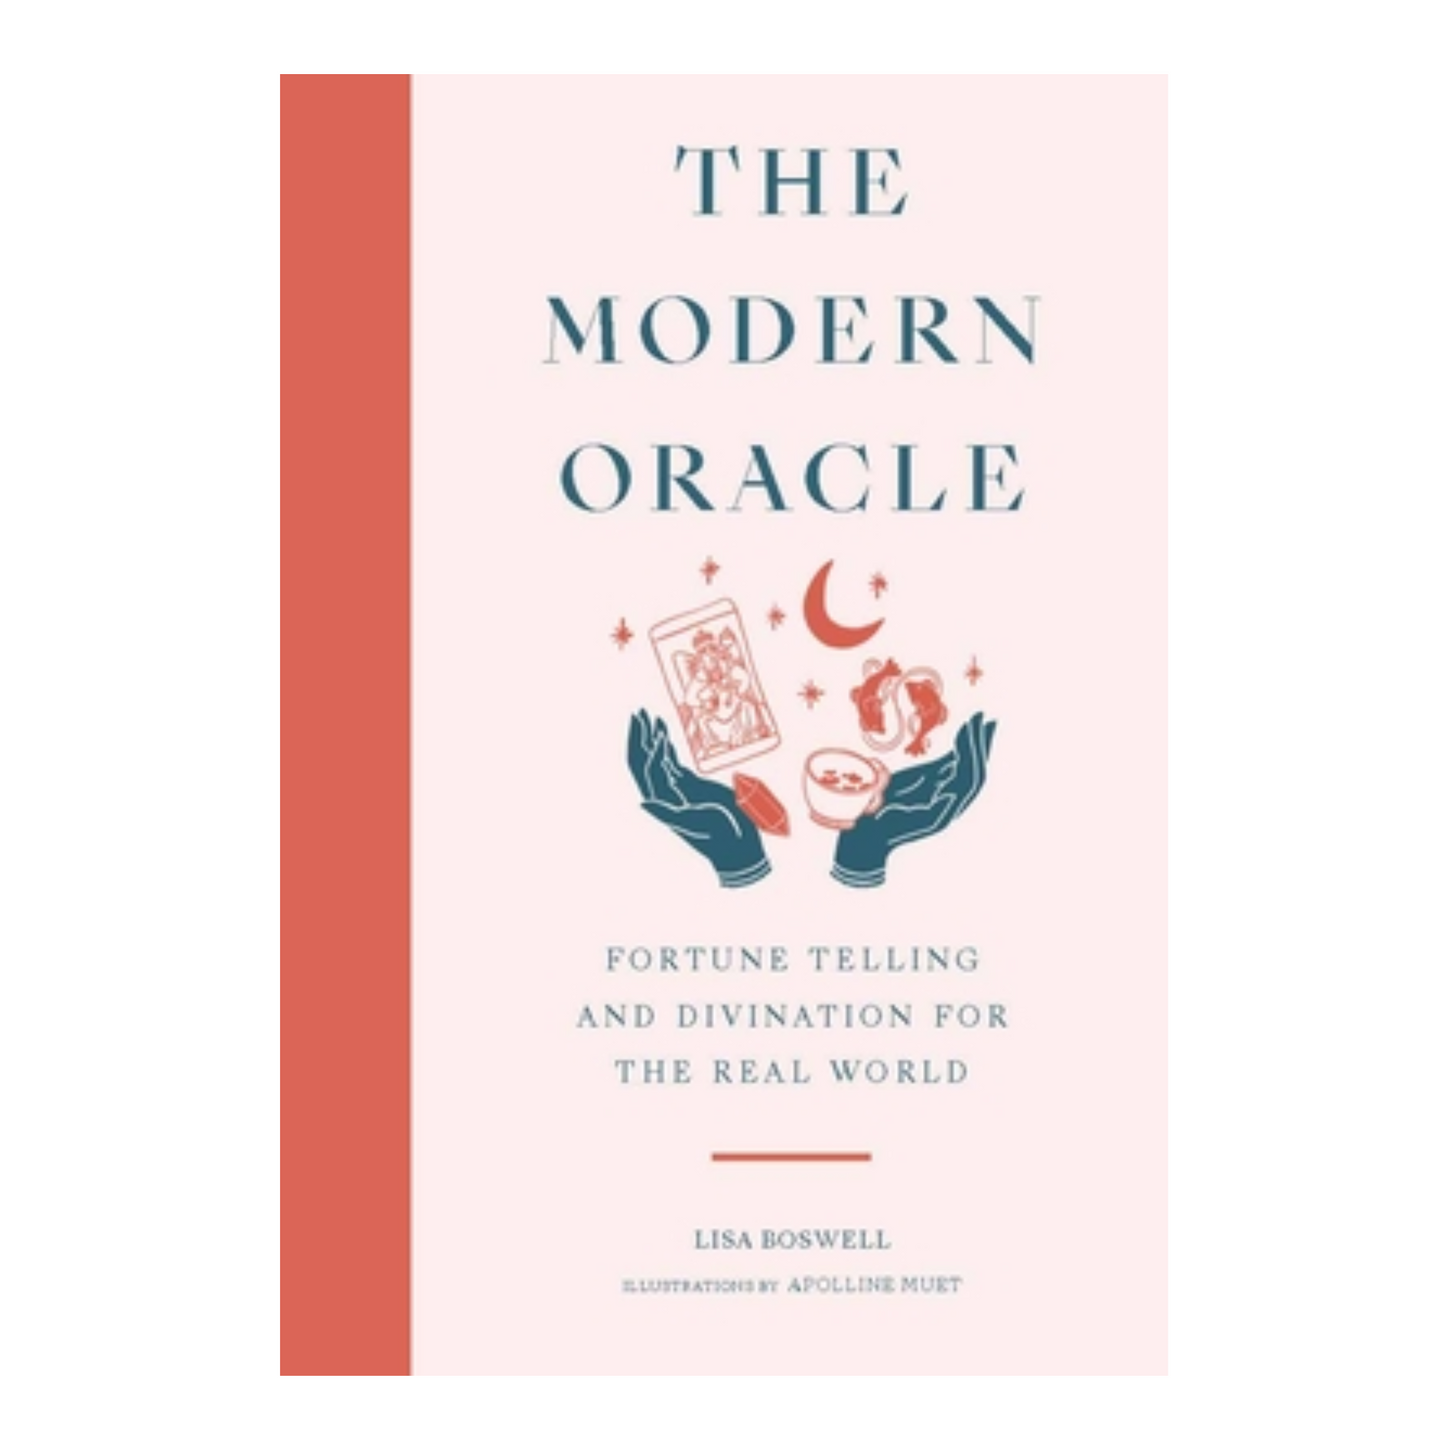 The Modern Oracle: Fortune Telling and Divination for the Real World by Lisa Boswell, Apolline Muet